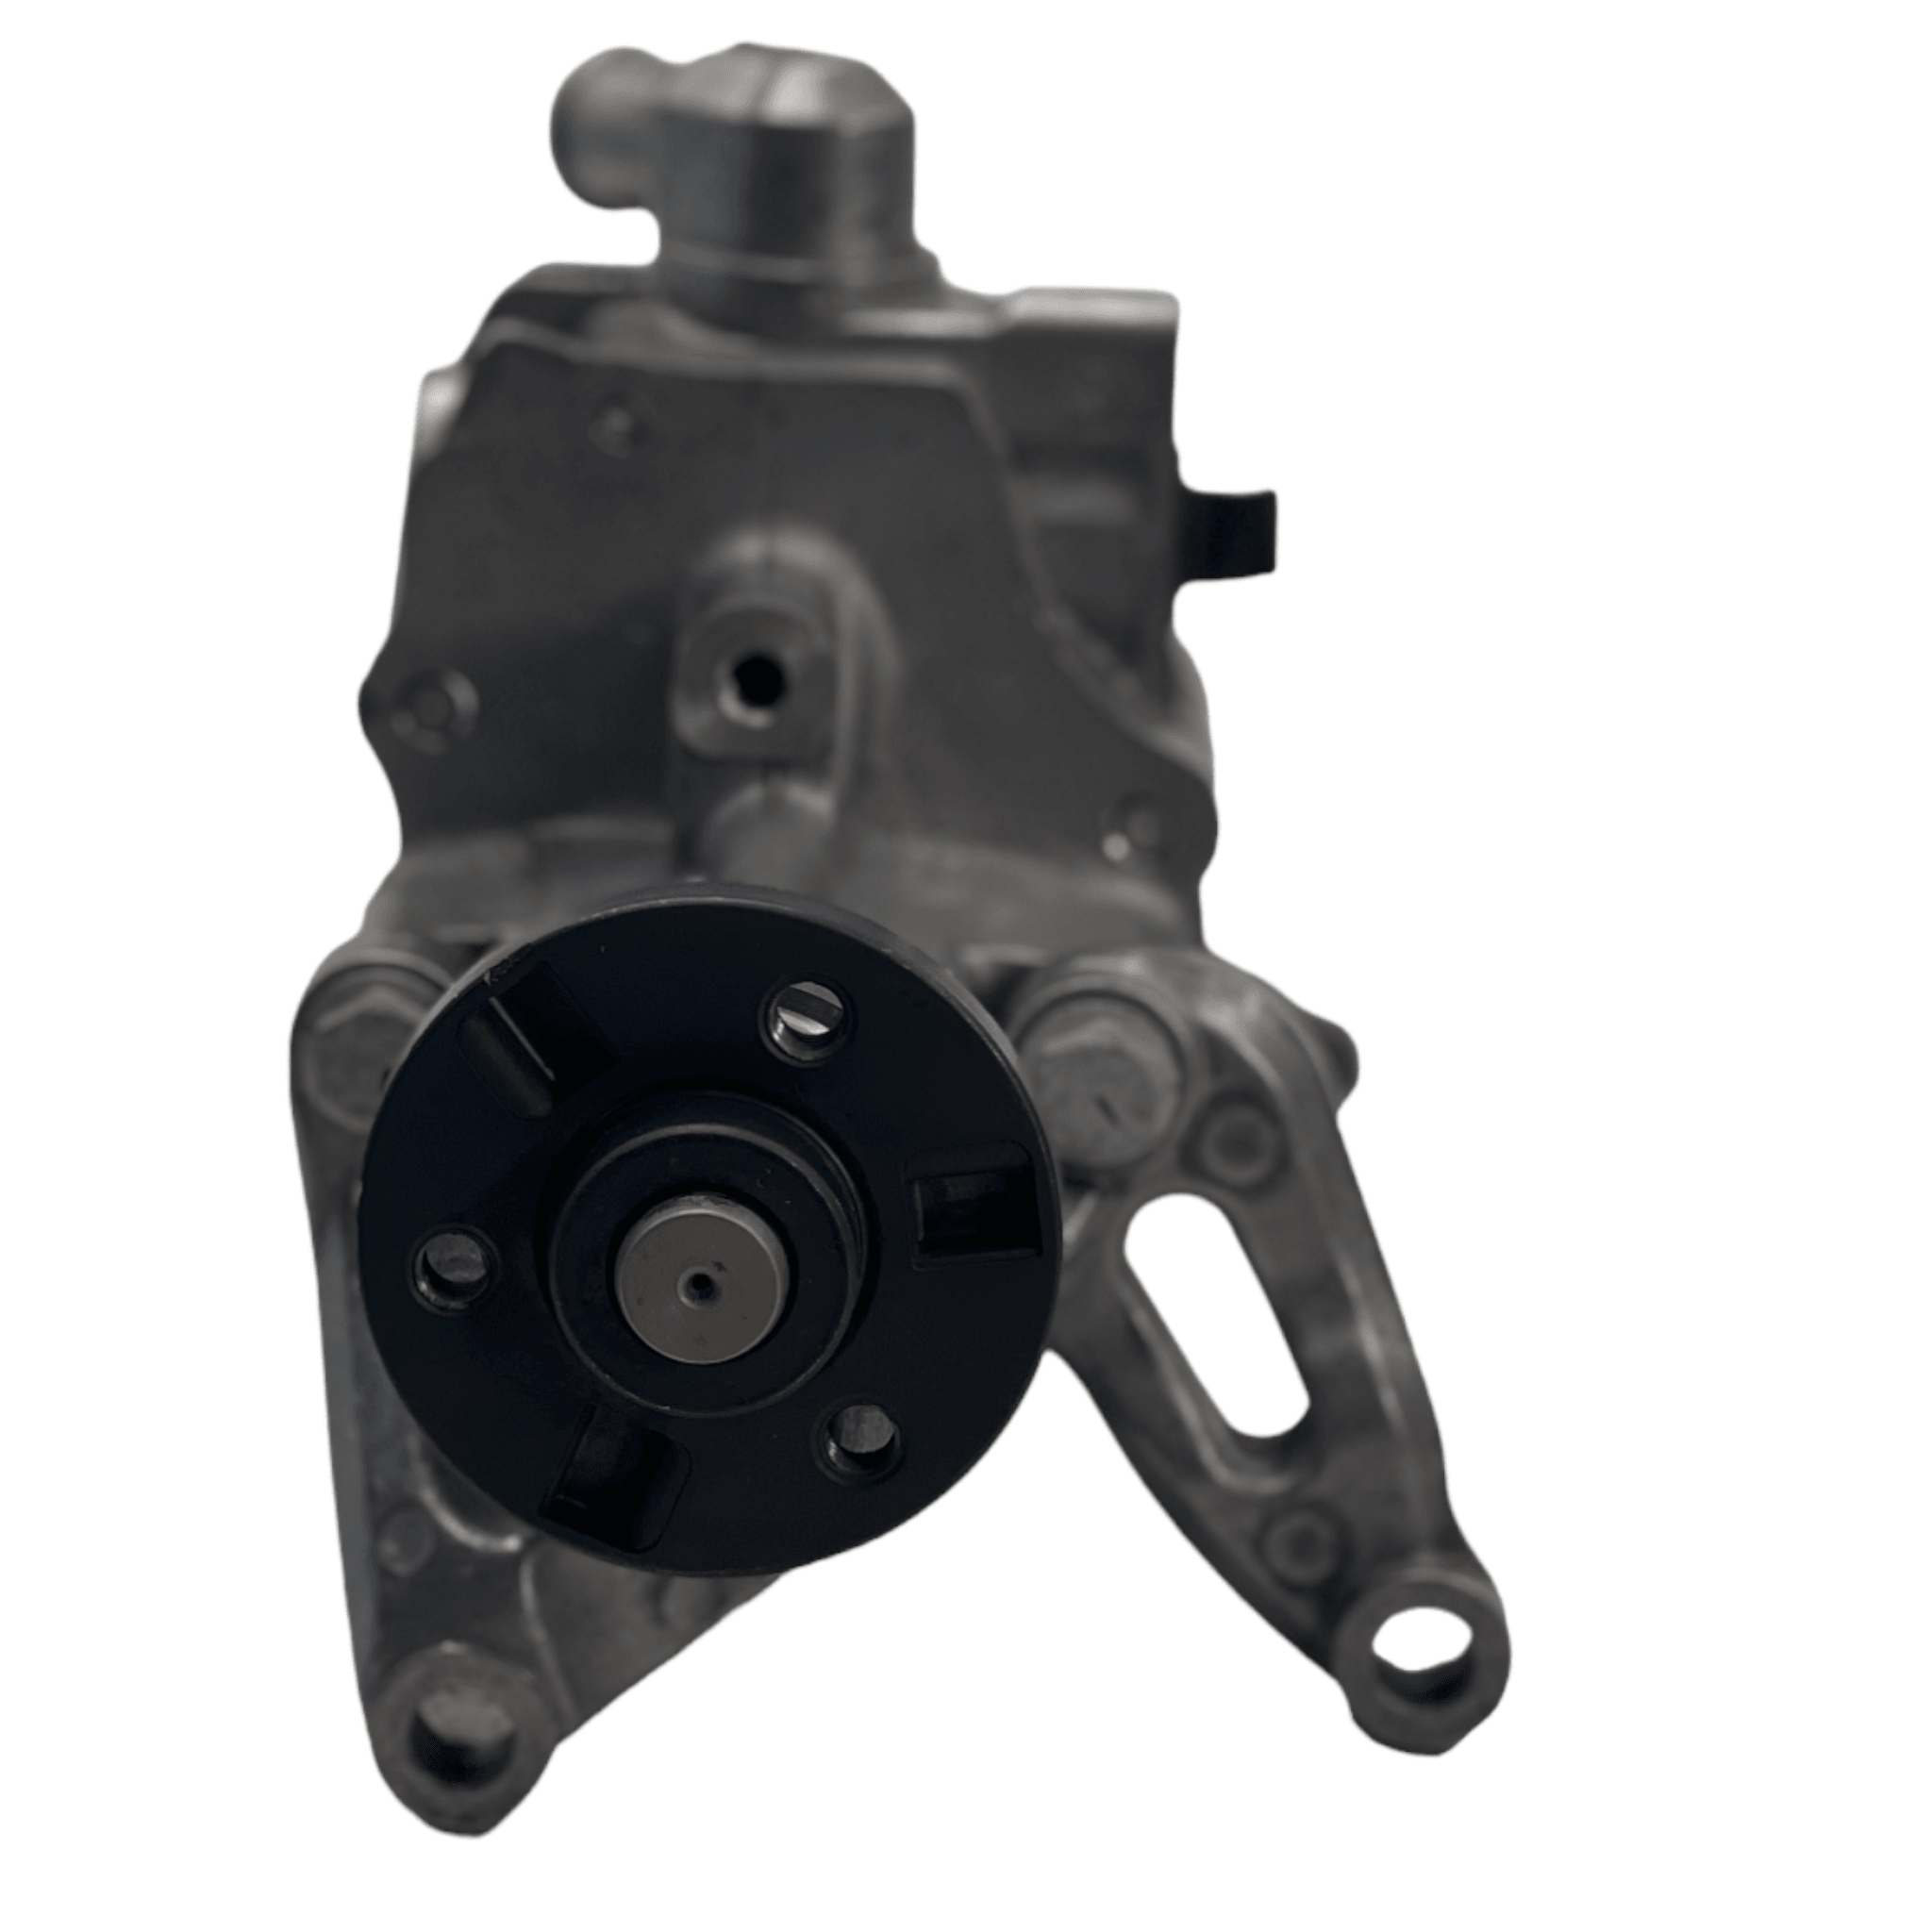 32416796453 St00154 O.E.M. Power Steering Pump For Bmw X6 X5 2011-2014 - ADVANCED TRUCK PARTS